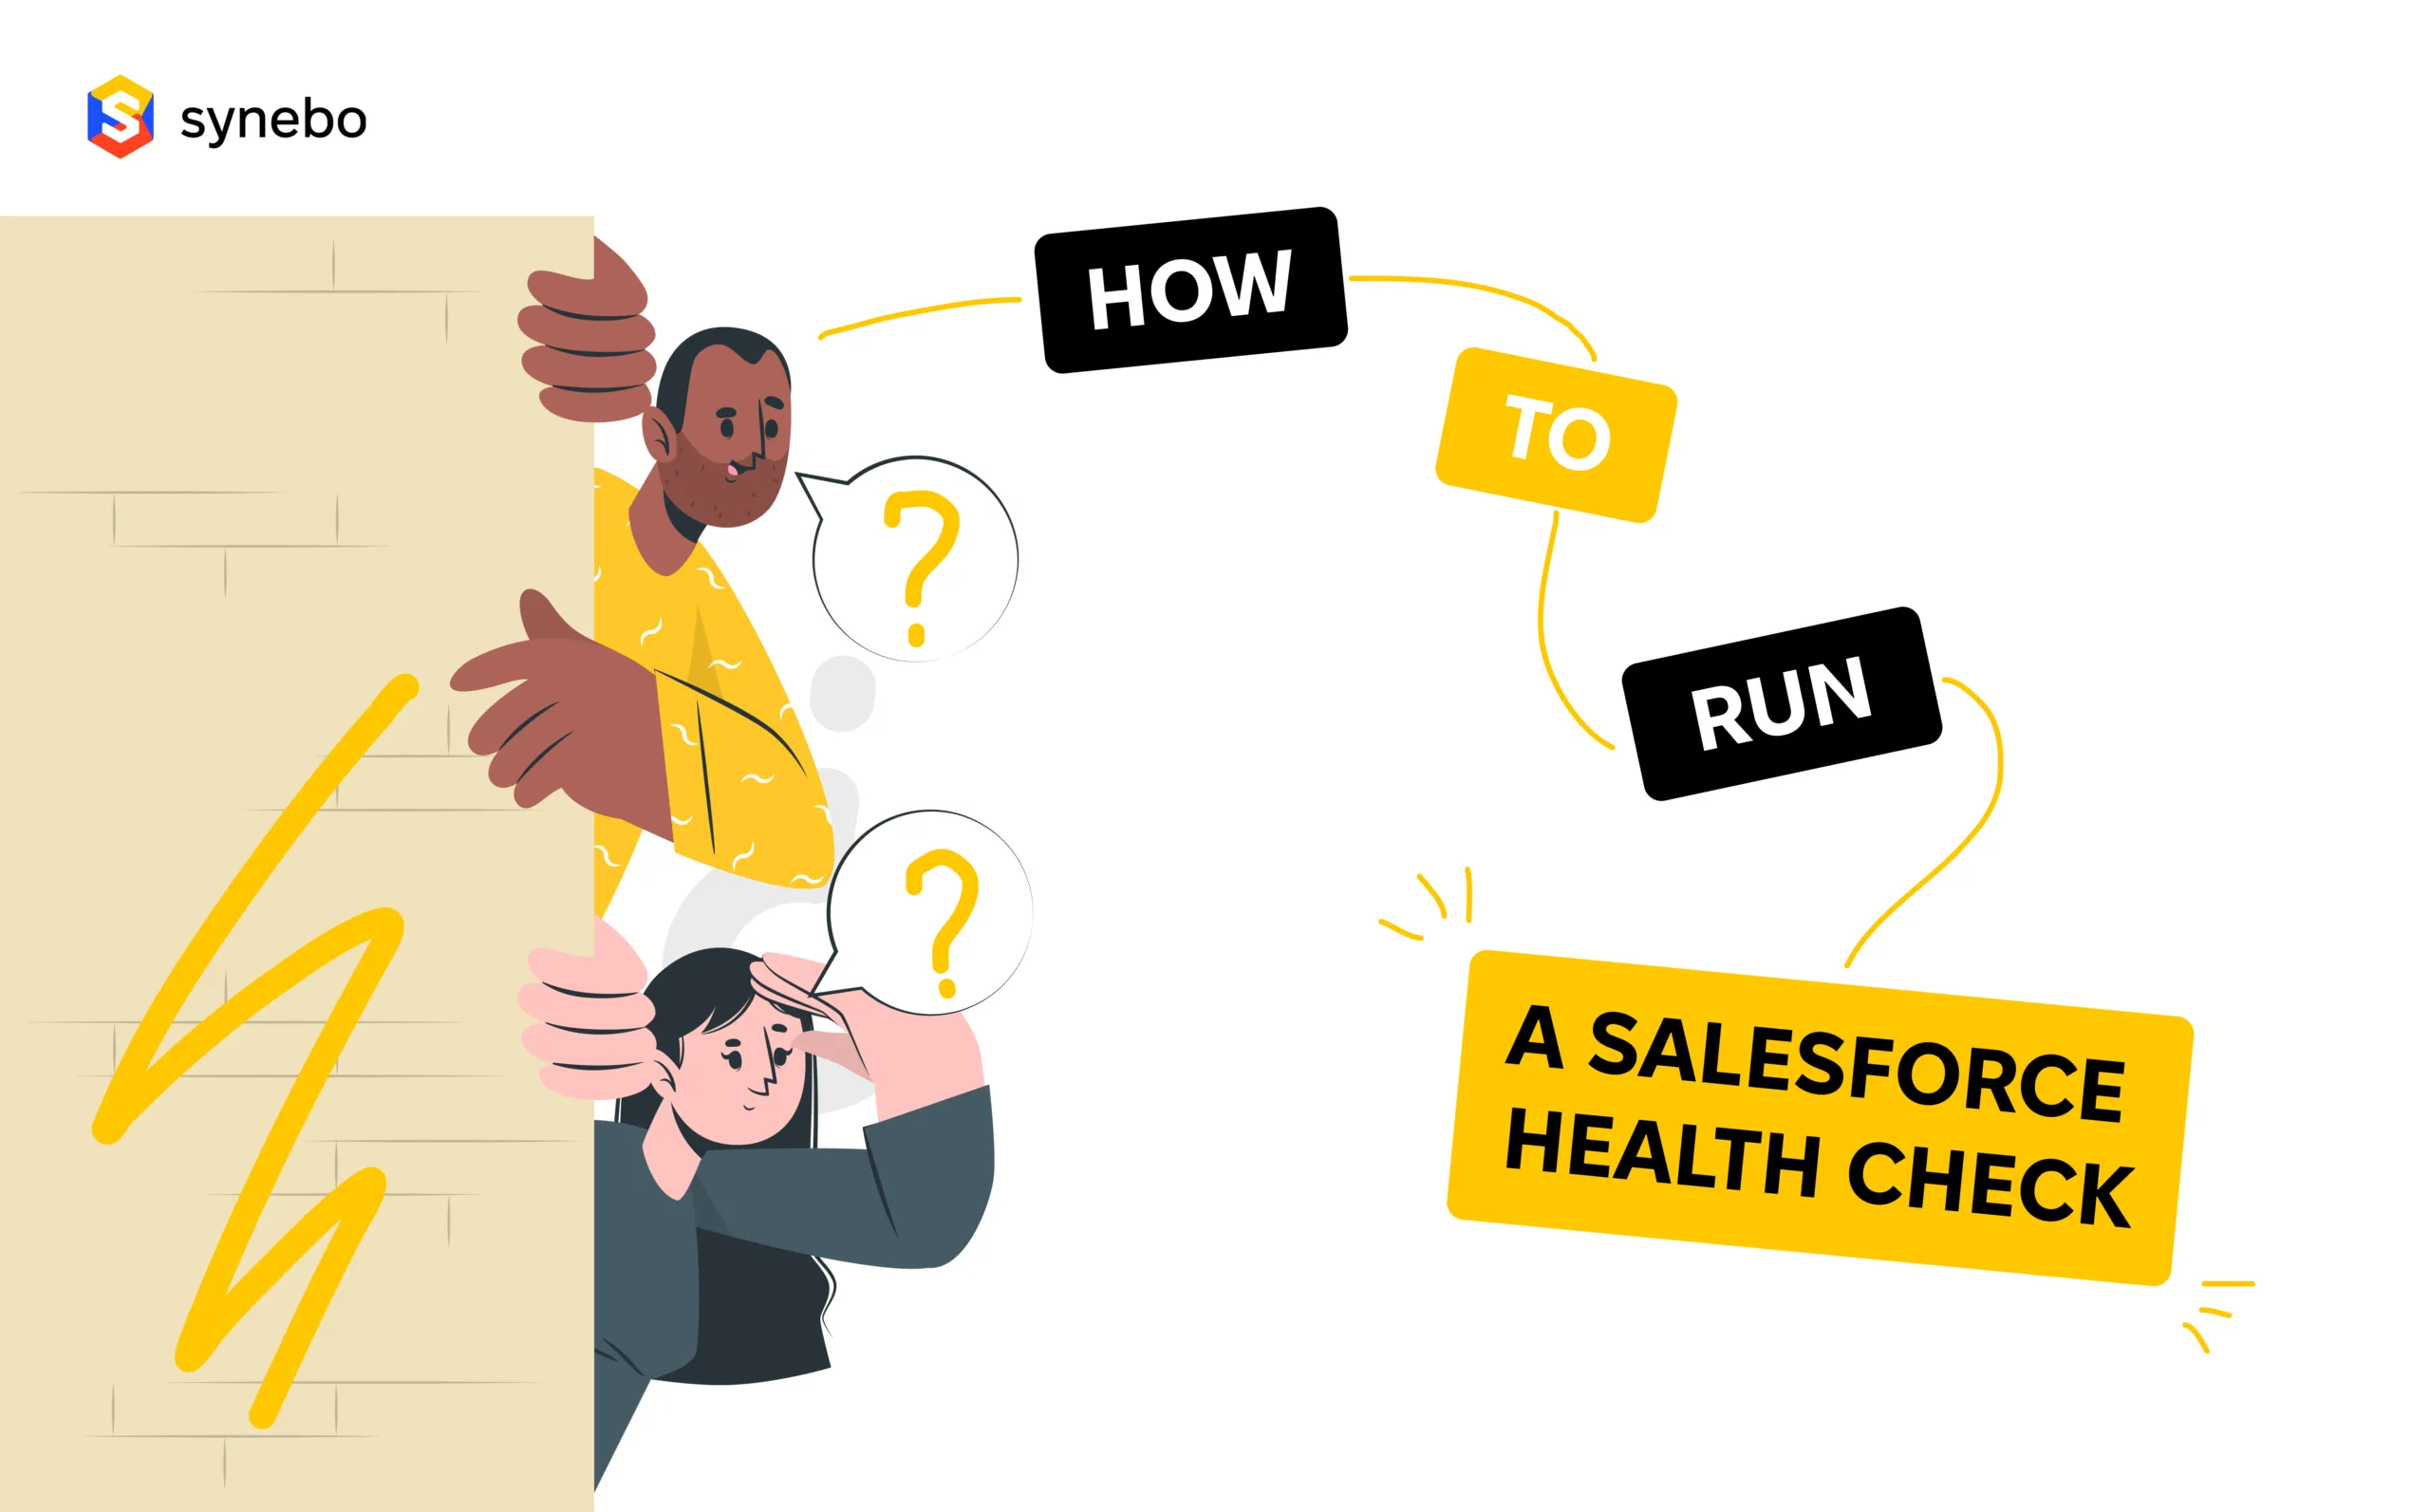 How to run a Salesforce Health Check